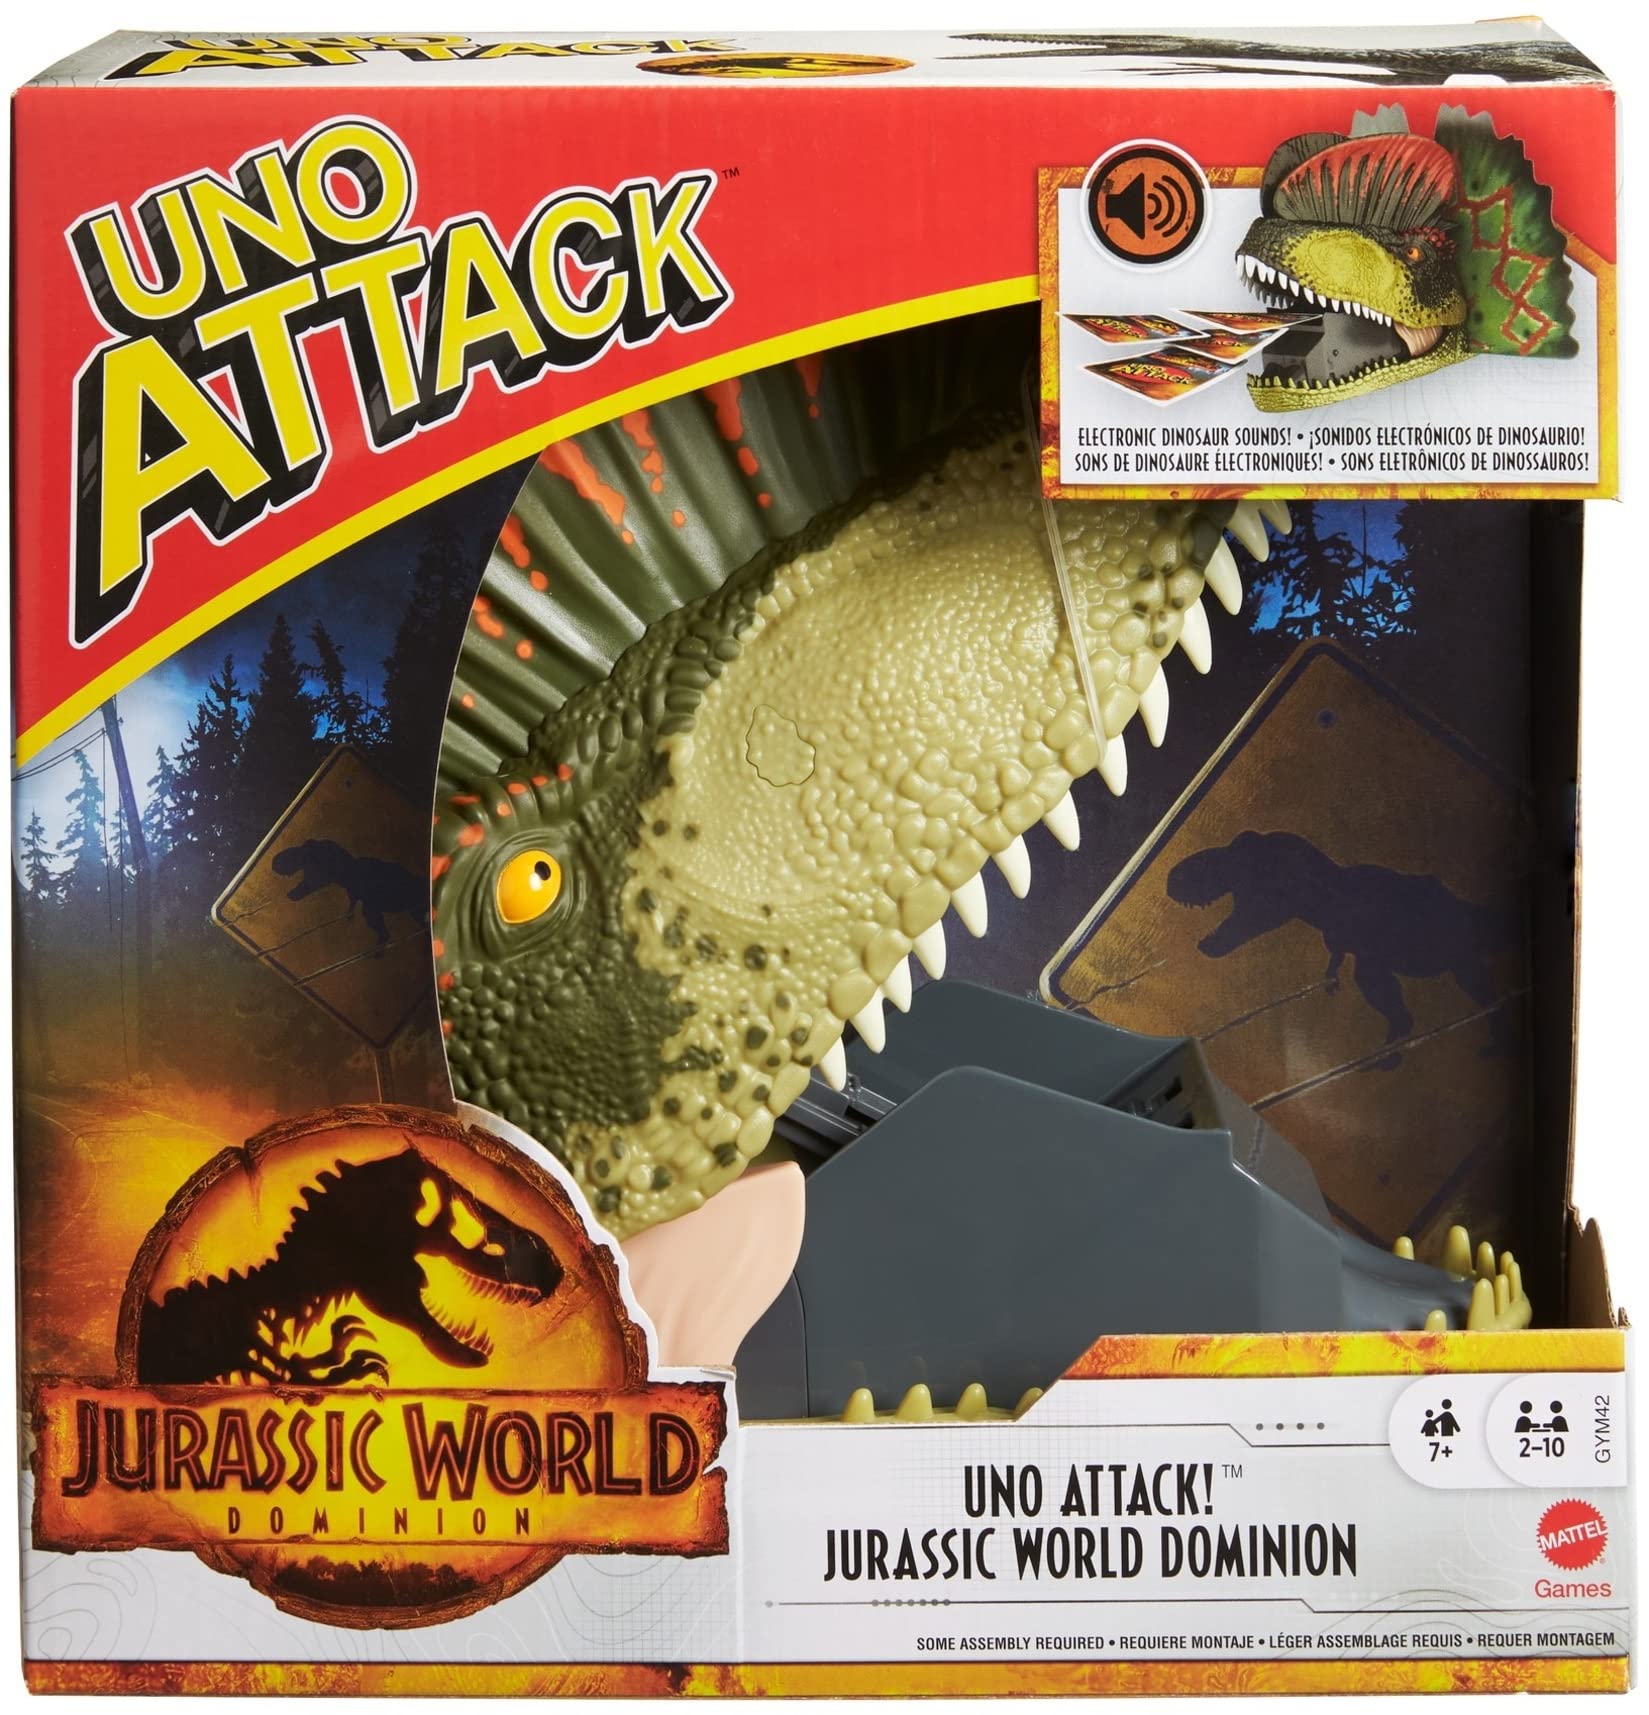 ​Mattel Games UNO Attack Jurassic World Domination Card Game For Kids & Family Night with Dinosaur Card Launcher, Lights & Sounds